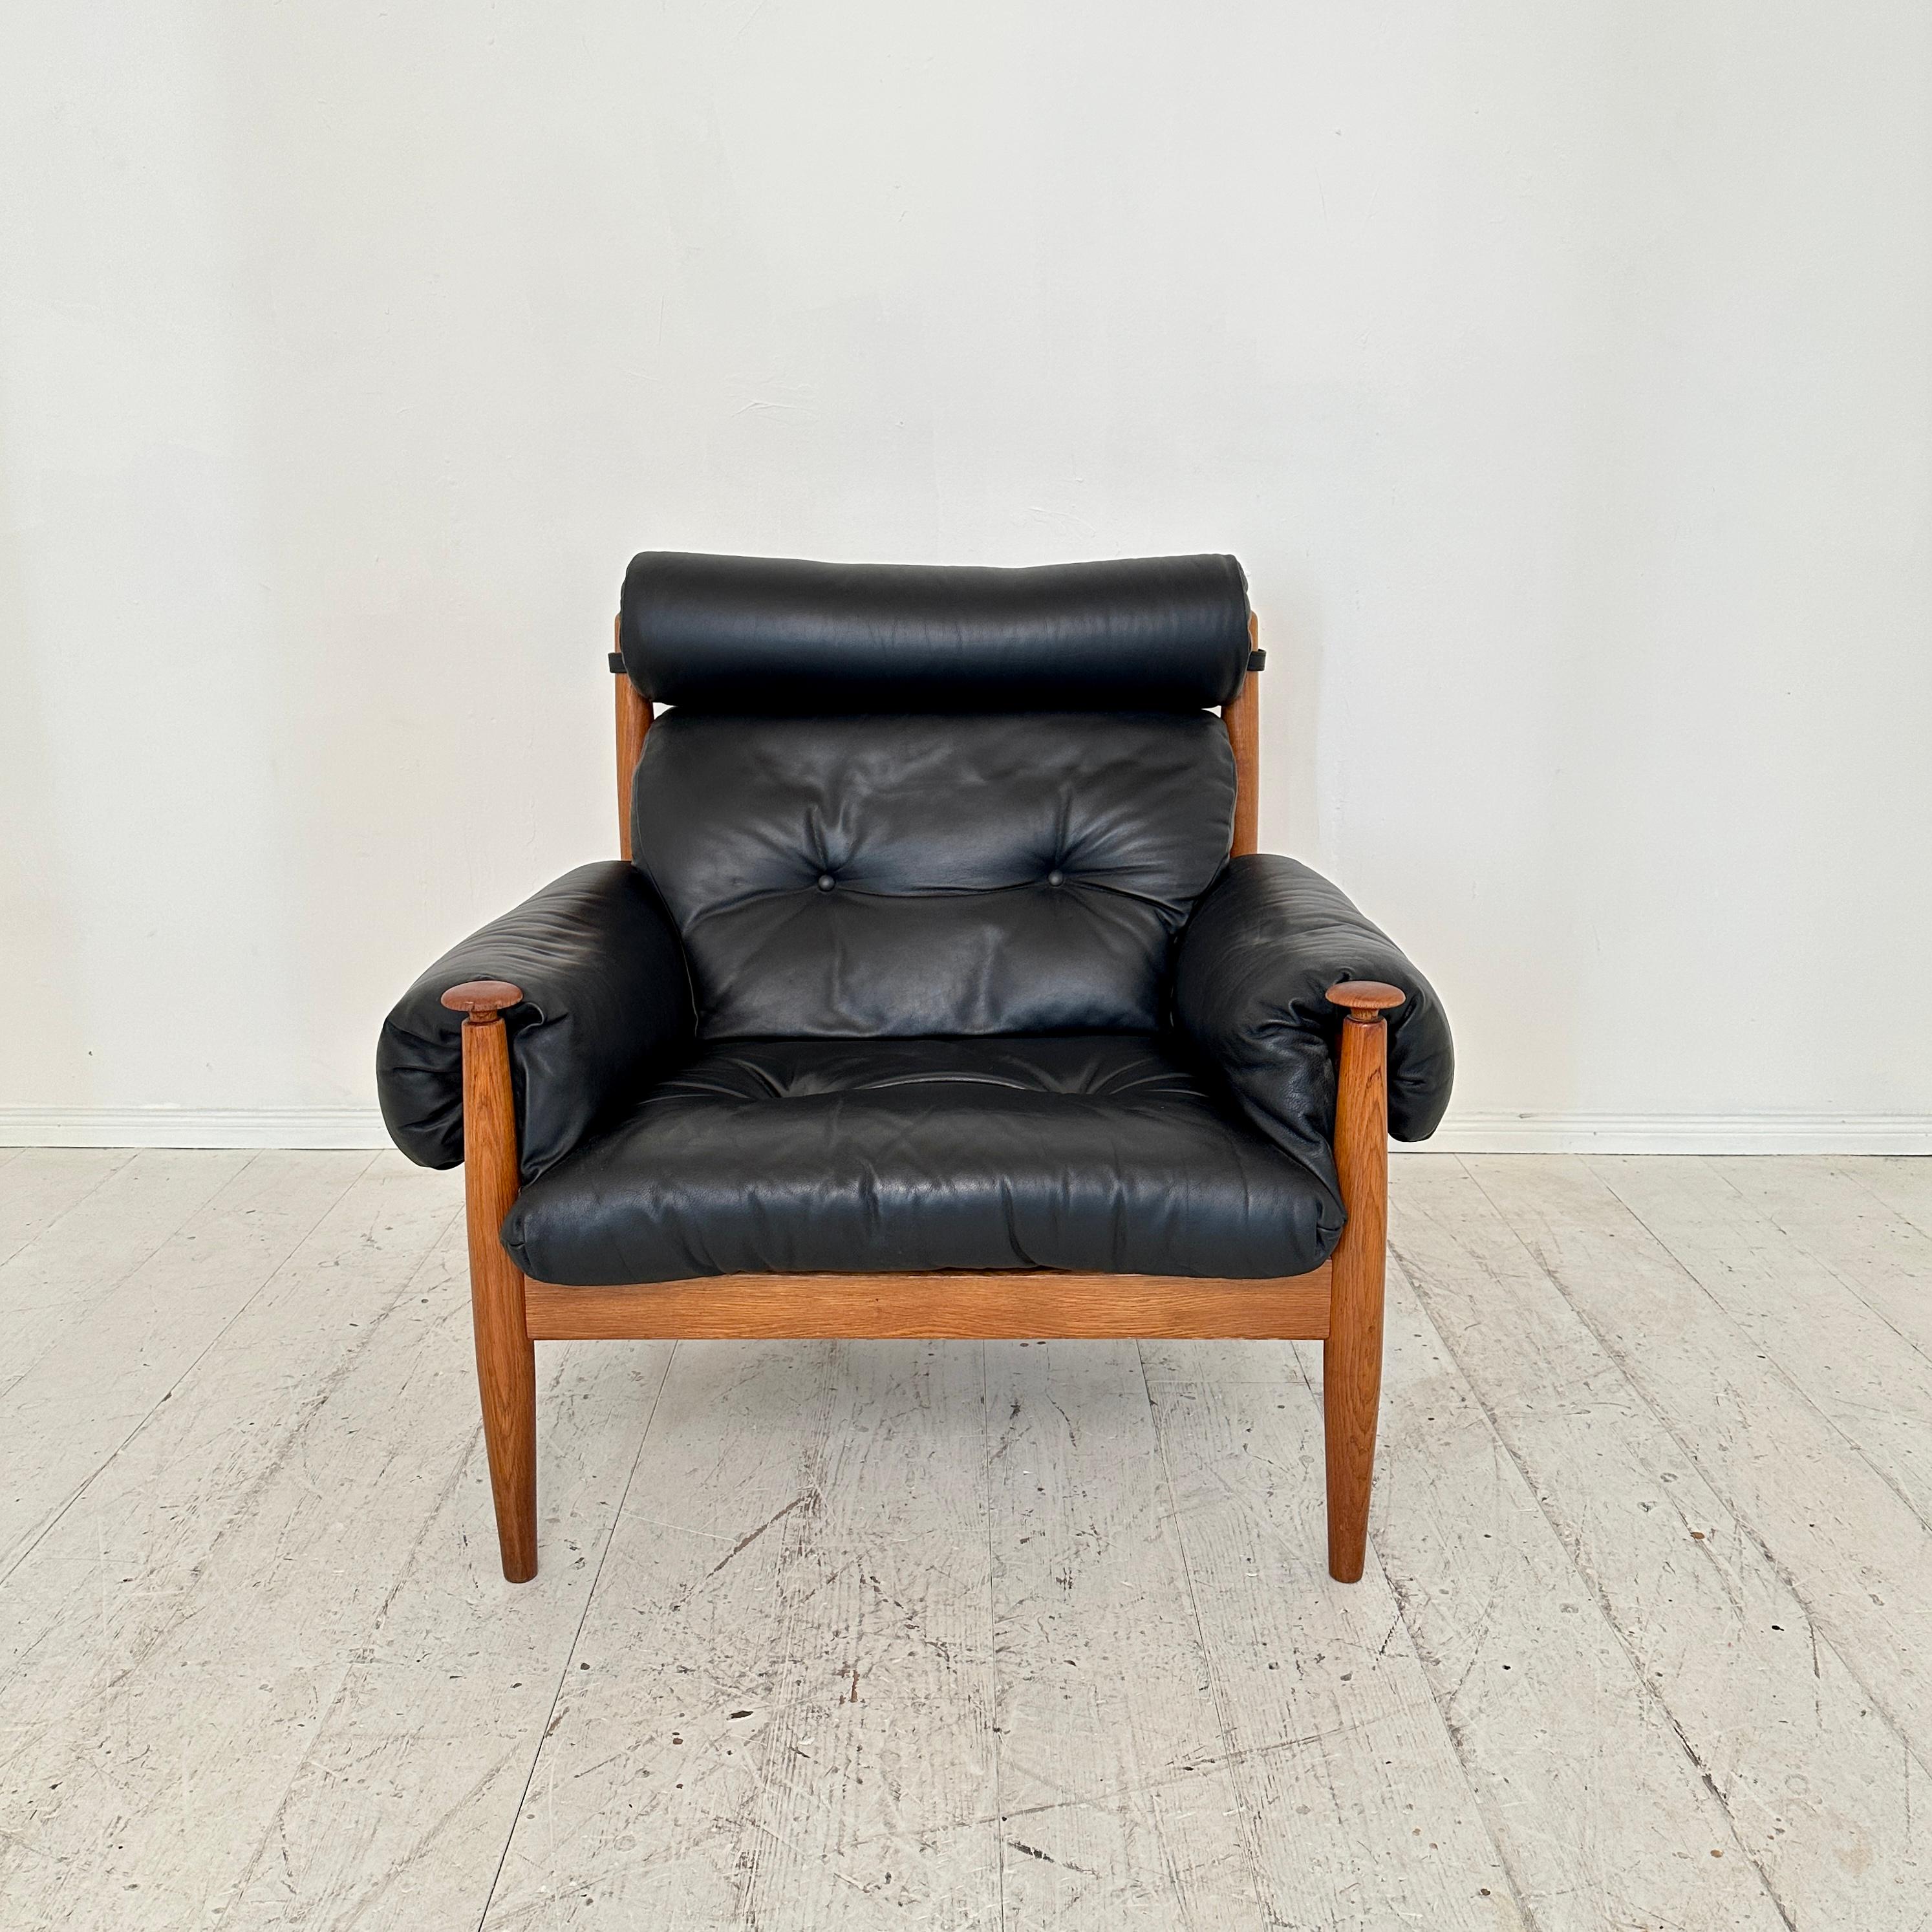 This Large Armchair by Eric Merthen for IRE Möbler was built and designed in Sweden around 1960.
It is made out of Oak and Black Leather.
A unique piece which is a great eye-catcher for your antique, modern, space age or mid-century interior.
It is